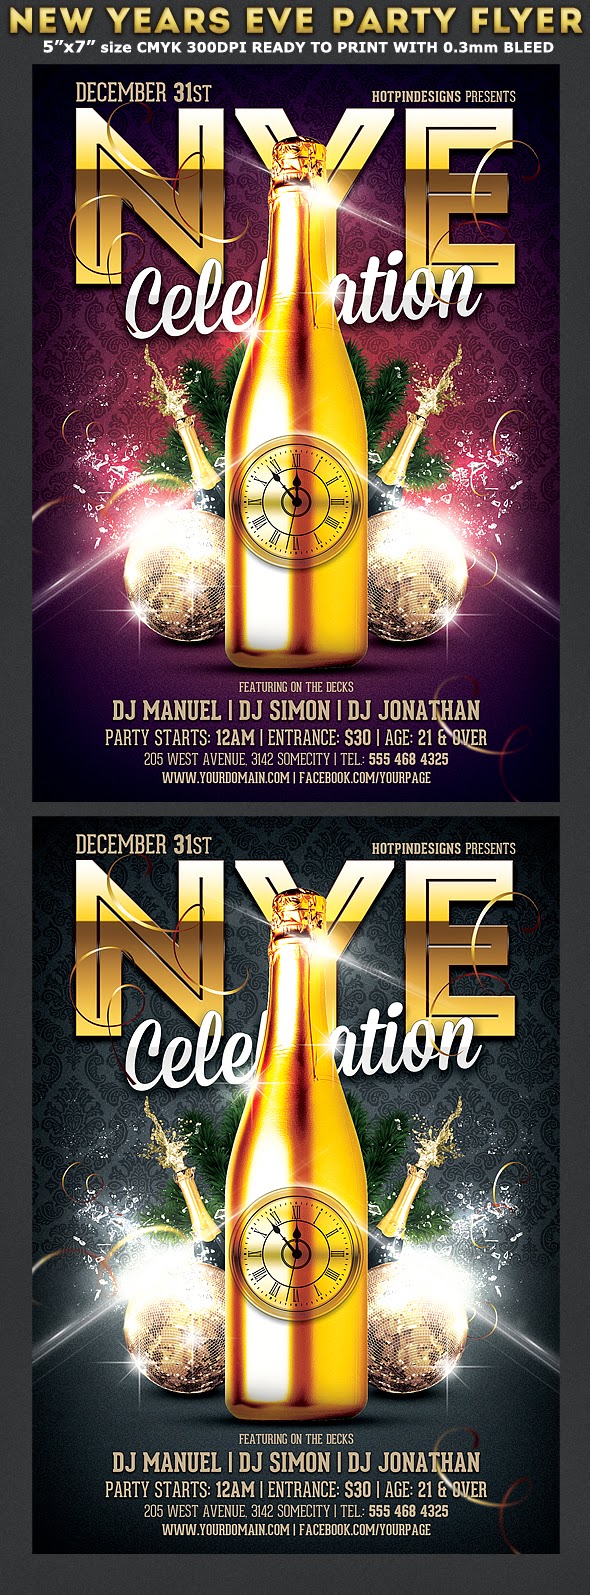  New Years Eve Party Flyer Template